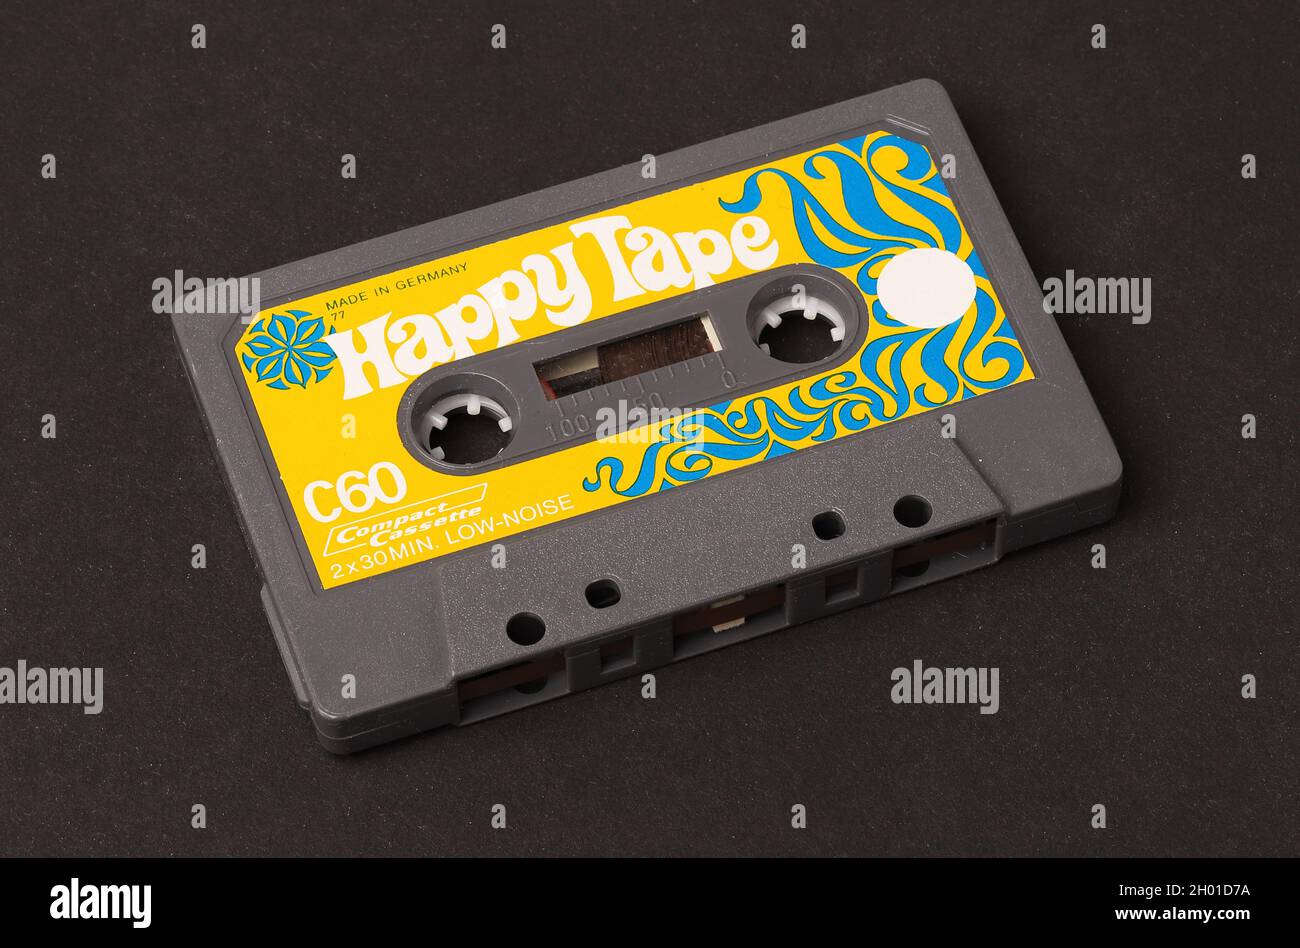 Stockholm, Sweden - October 8, 2021: Vintage compact cassette C60 brandes Happy Tape, produced 1977 by Agfa-Gevaert in Germany for the Swedish departm Stock Photo